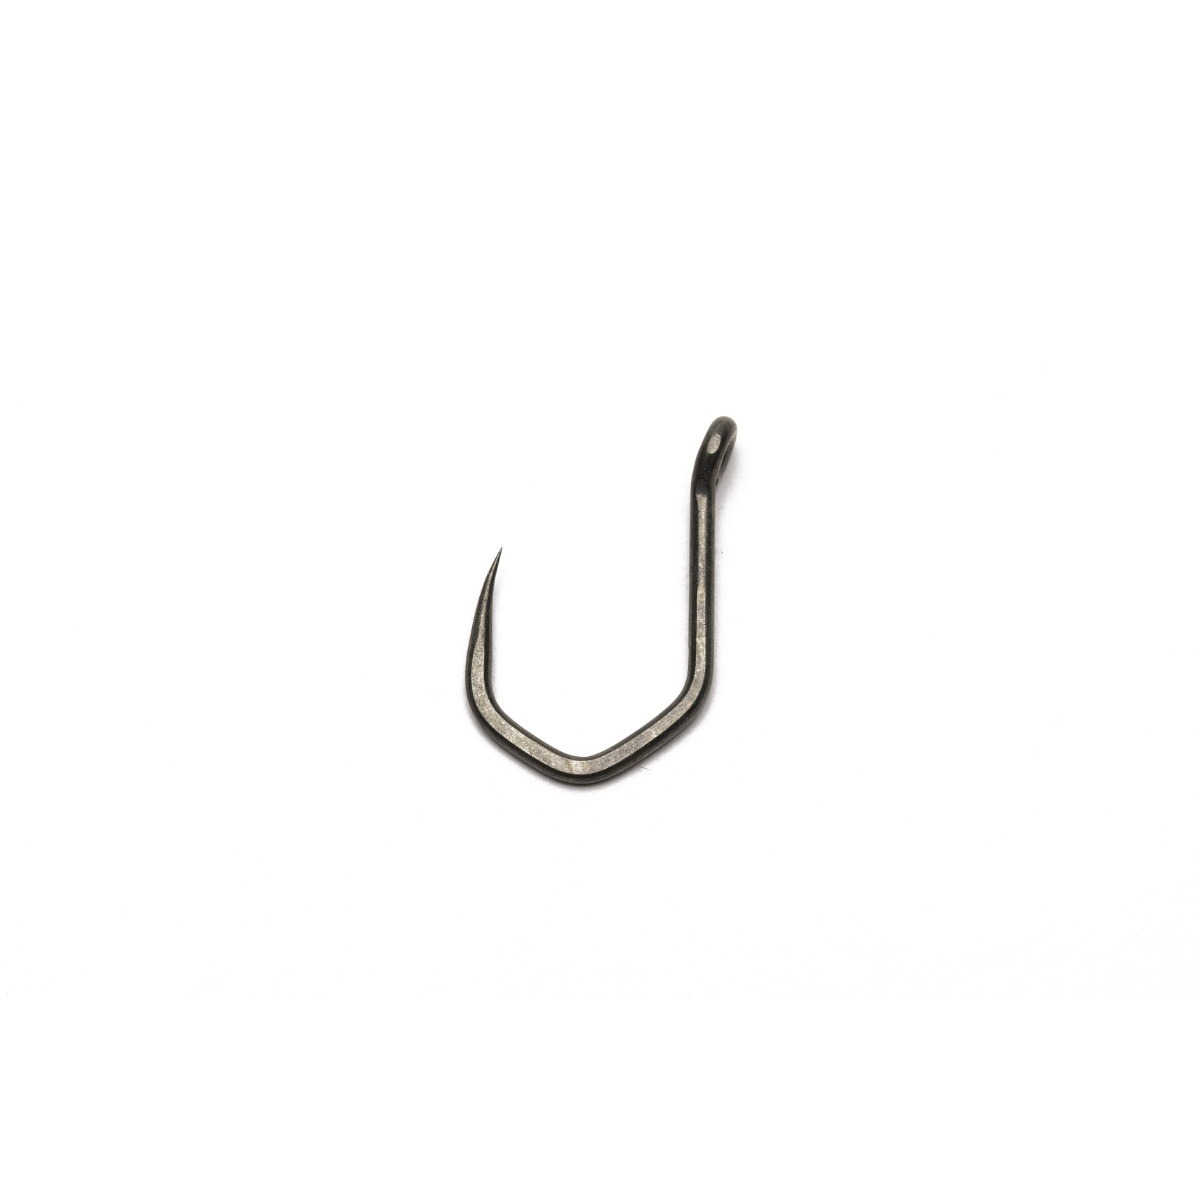 Nash Chod Claw - Size 6 Barbless